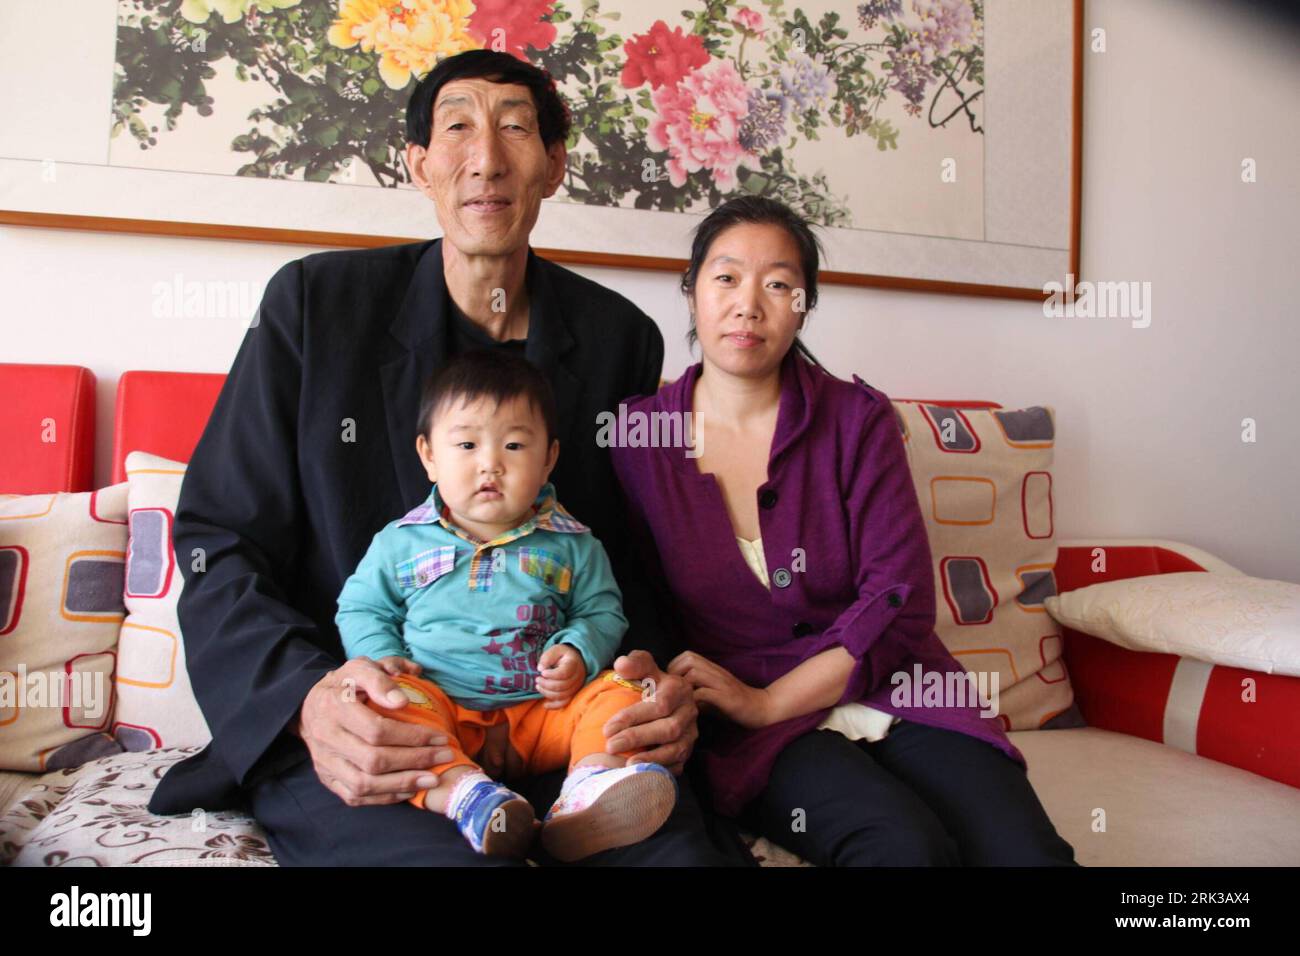 Bildnummer: 53401058  Datum: 21.09.2009  Copyright: imago/Xinhua  -- CHIFENG,  (Xinhua) -- 2.36-meters-high Chinese herdsman Bao Xishun, the previous world s tallest man, stays with his wife and son at home, in Chifeng City, north China s Inner Mongolia Autonomous Region, Sept. 21, 2009. The Guinness World Records announced on September 16 that 27-year-old turkish man Sultan Kosen, having his height validated at 2.465 metres, takes over the title of the world s tallest man from China s Bao Xishun. Kosen s record was unveiled to mark the launch of the Guinness World Records 2010 edition, now in Stock Photo